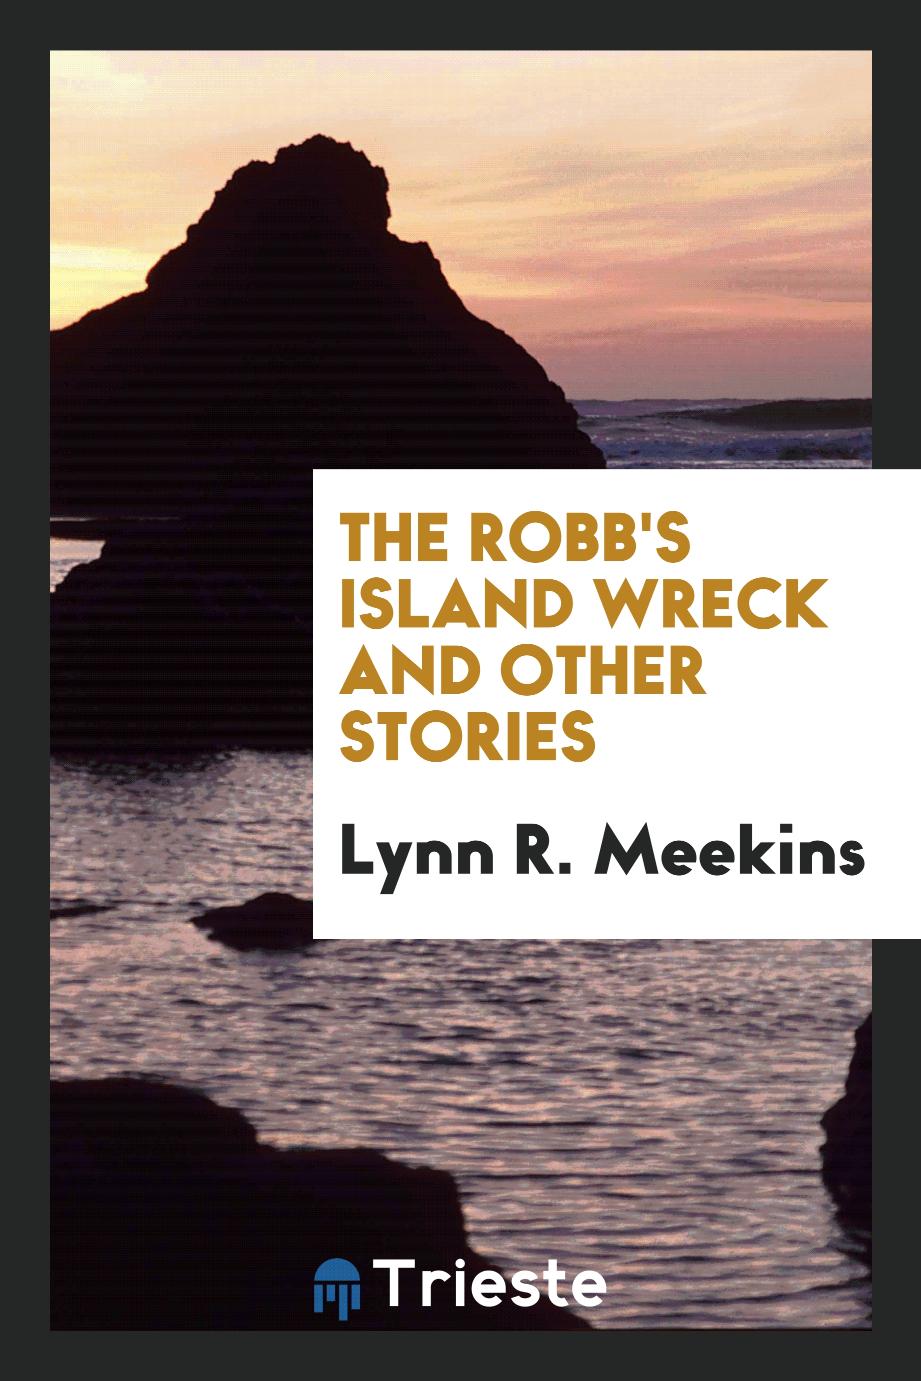 The Robb's Island Wreck and Other Stories